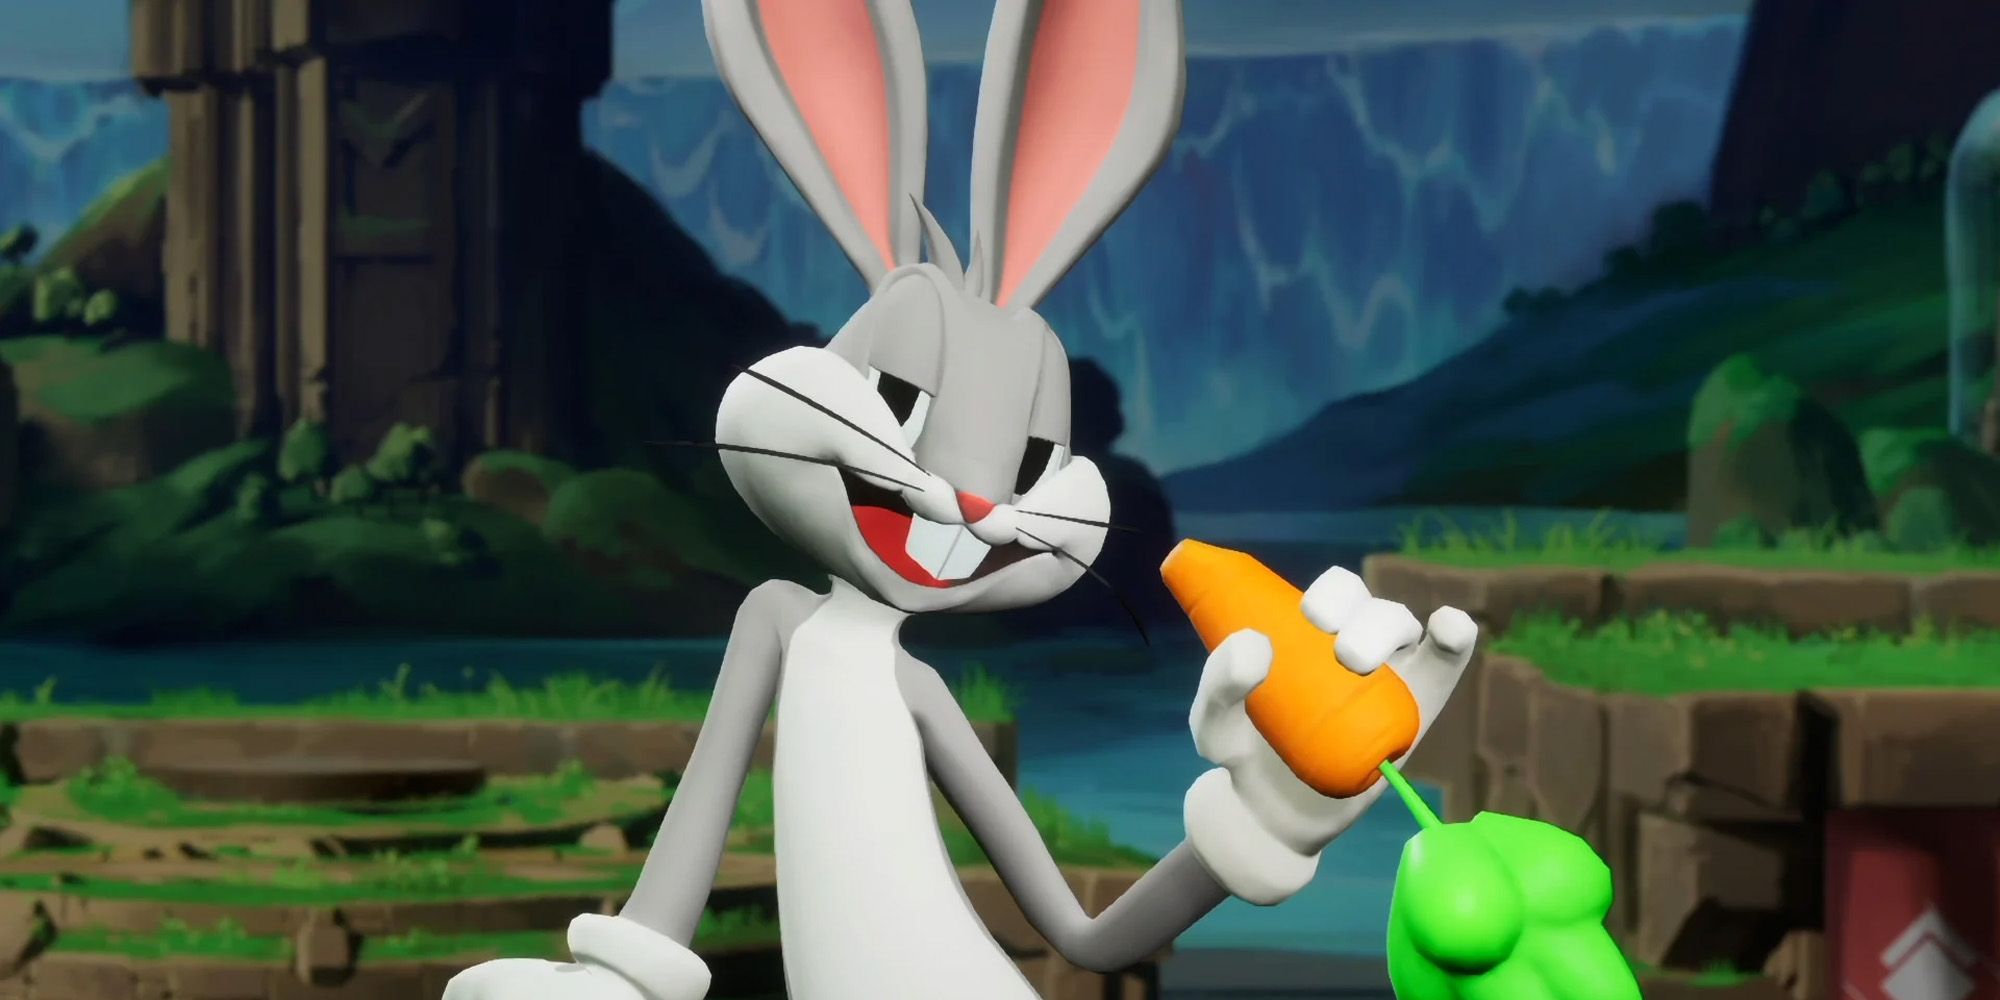 MultiVersus Bugs Bunny character guide